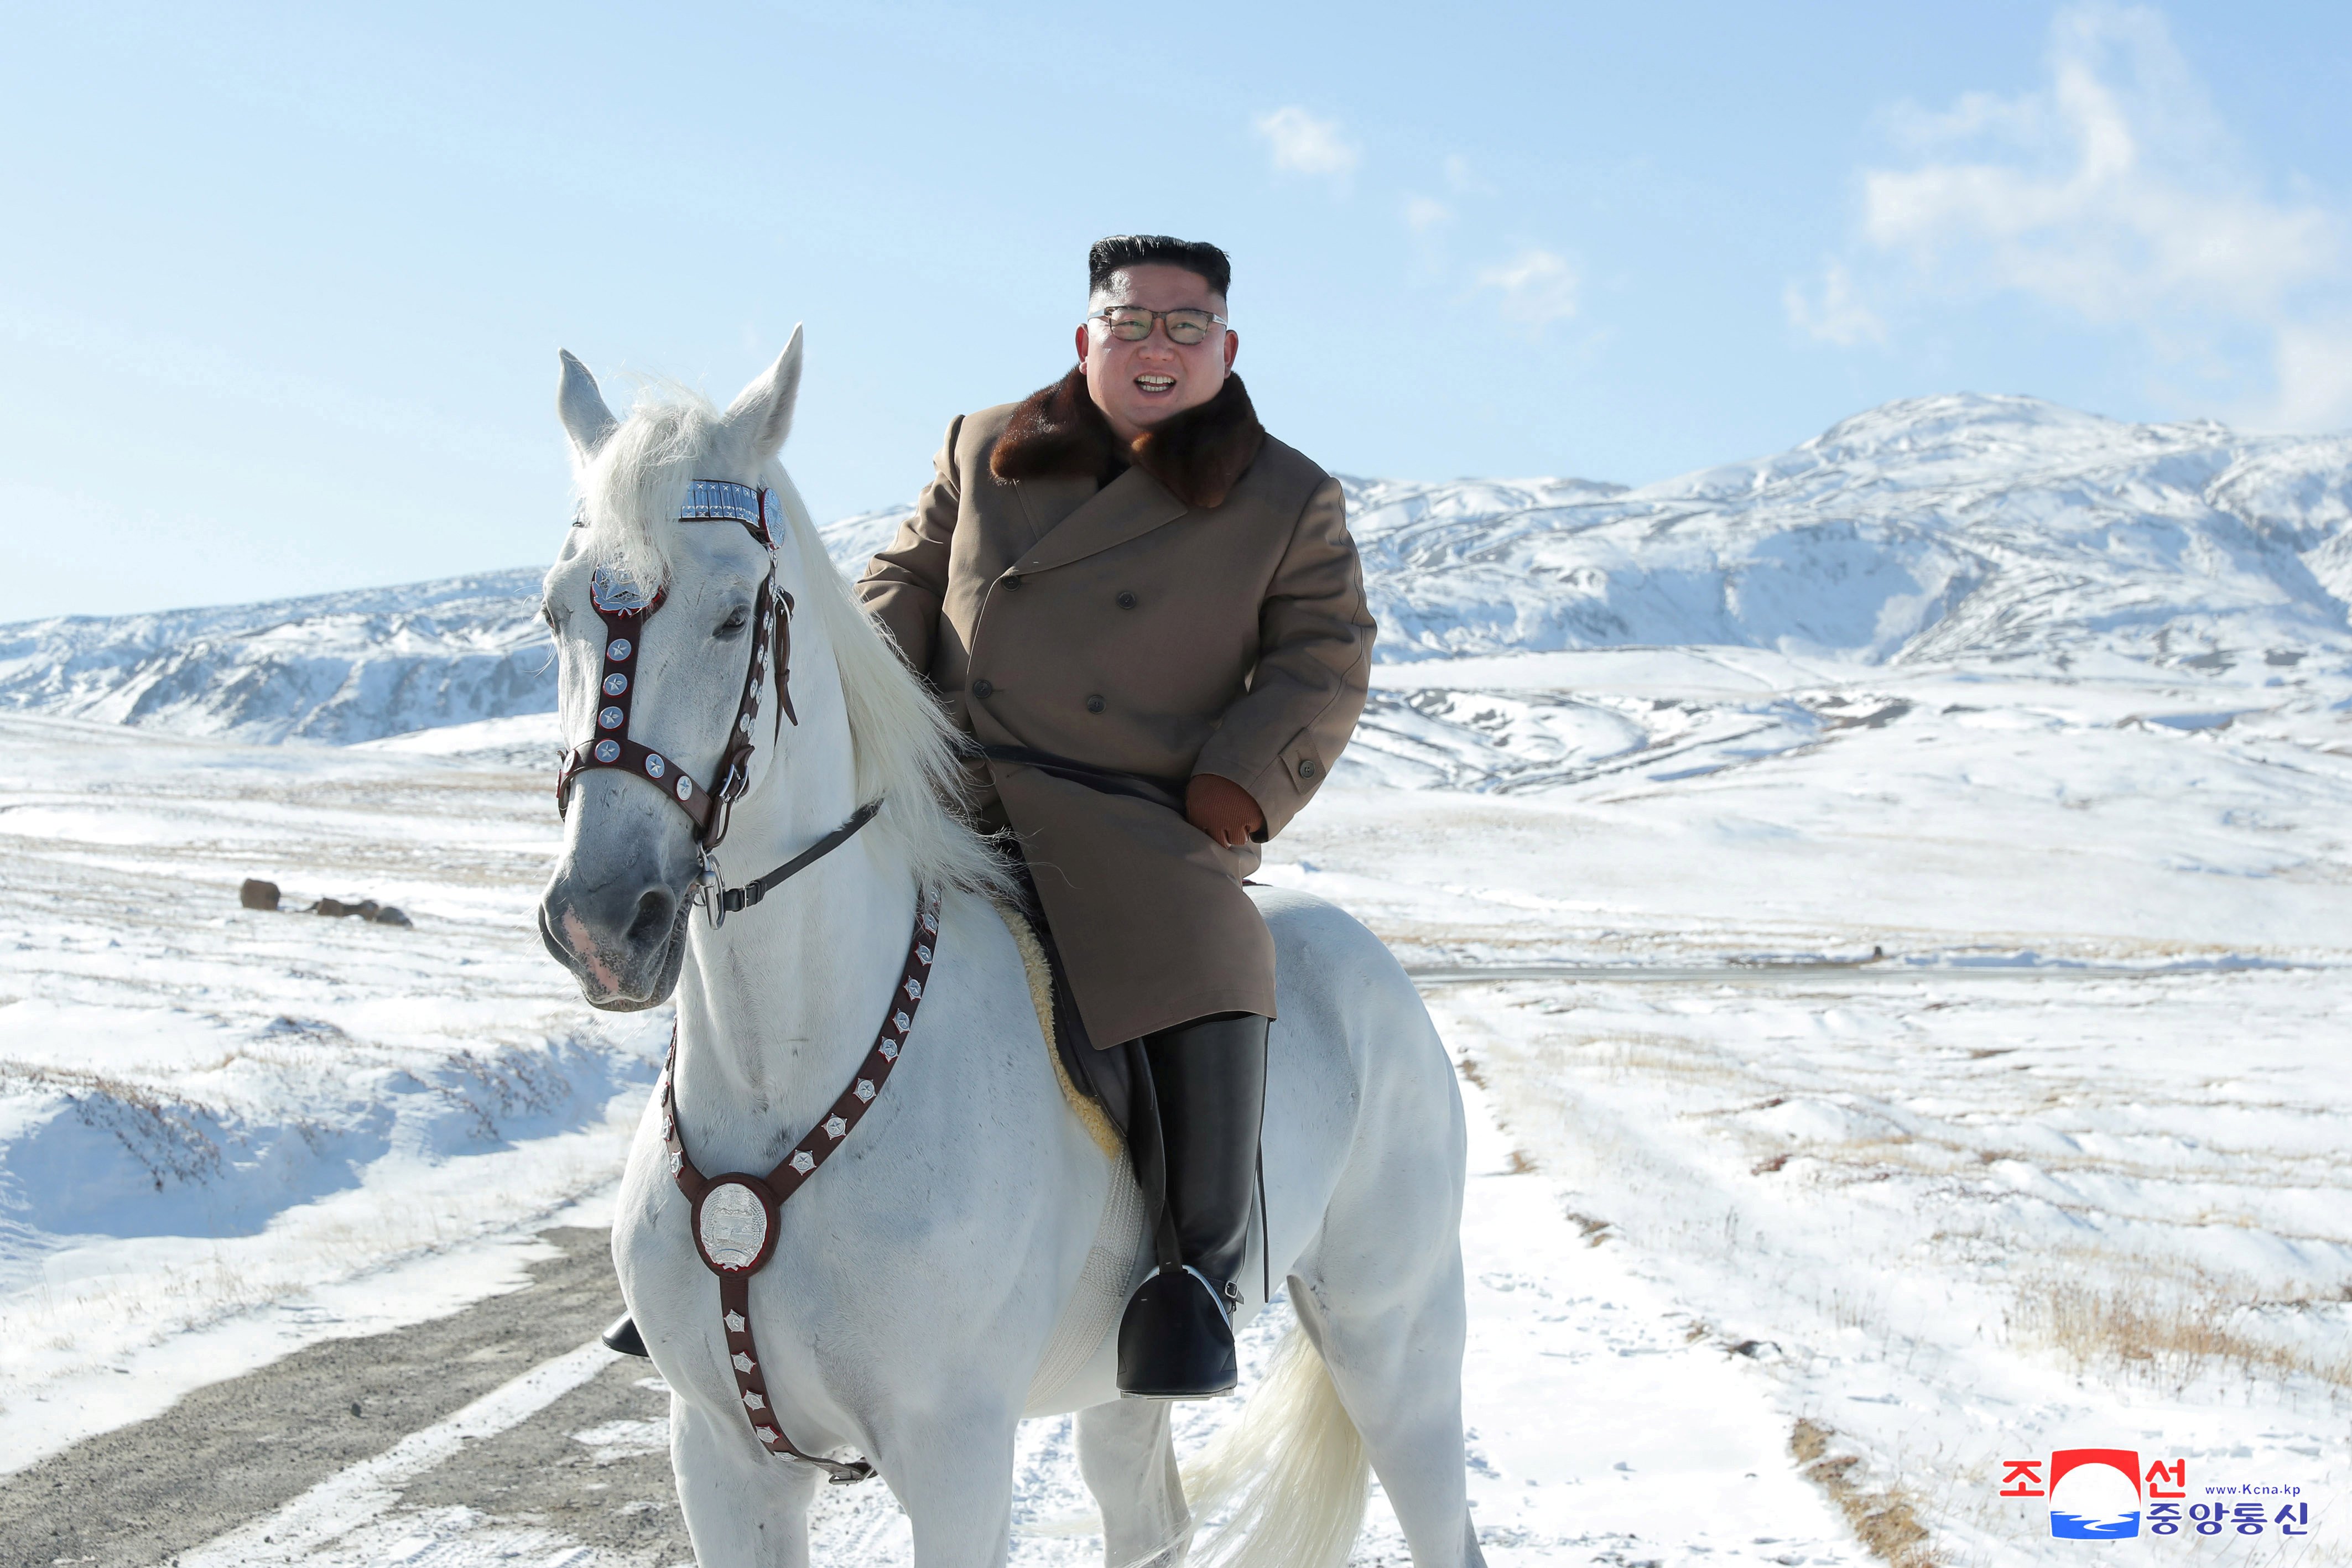 North Korean leader Kim Jong Un rides a horse during snowfall in Mount Paektu in this image released by North Korea's Korean Central News Agency (KCNA) on October 16, 2019. KCNA via REUTERS ATTENTION EDITORS - THIS IMAGE WAS PROVIDED BY A THIRD PARTY. REUTERS IS UNABLE TO INDEPENDENTLY VERIFY THIS IMAGE. NO THIRD PARTY SALES. SOUTH KOREA OUT.